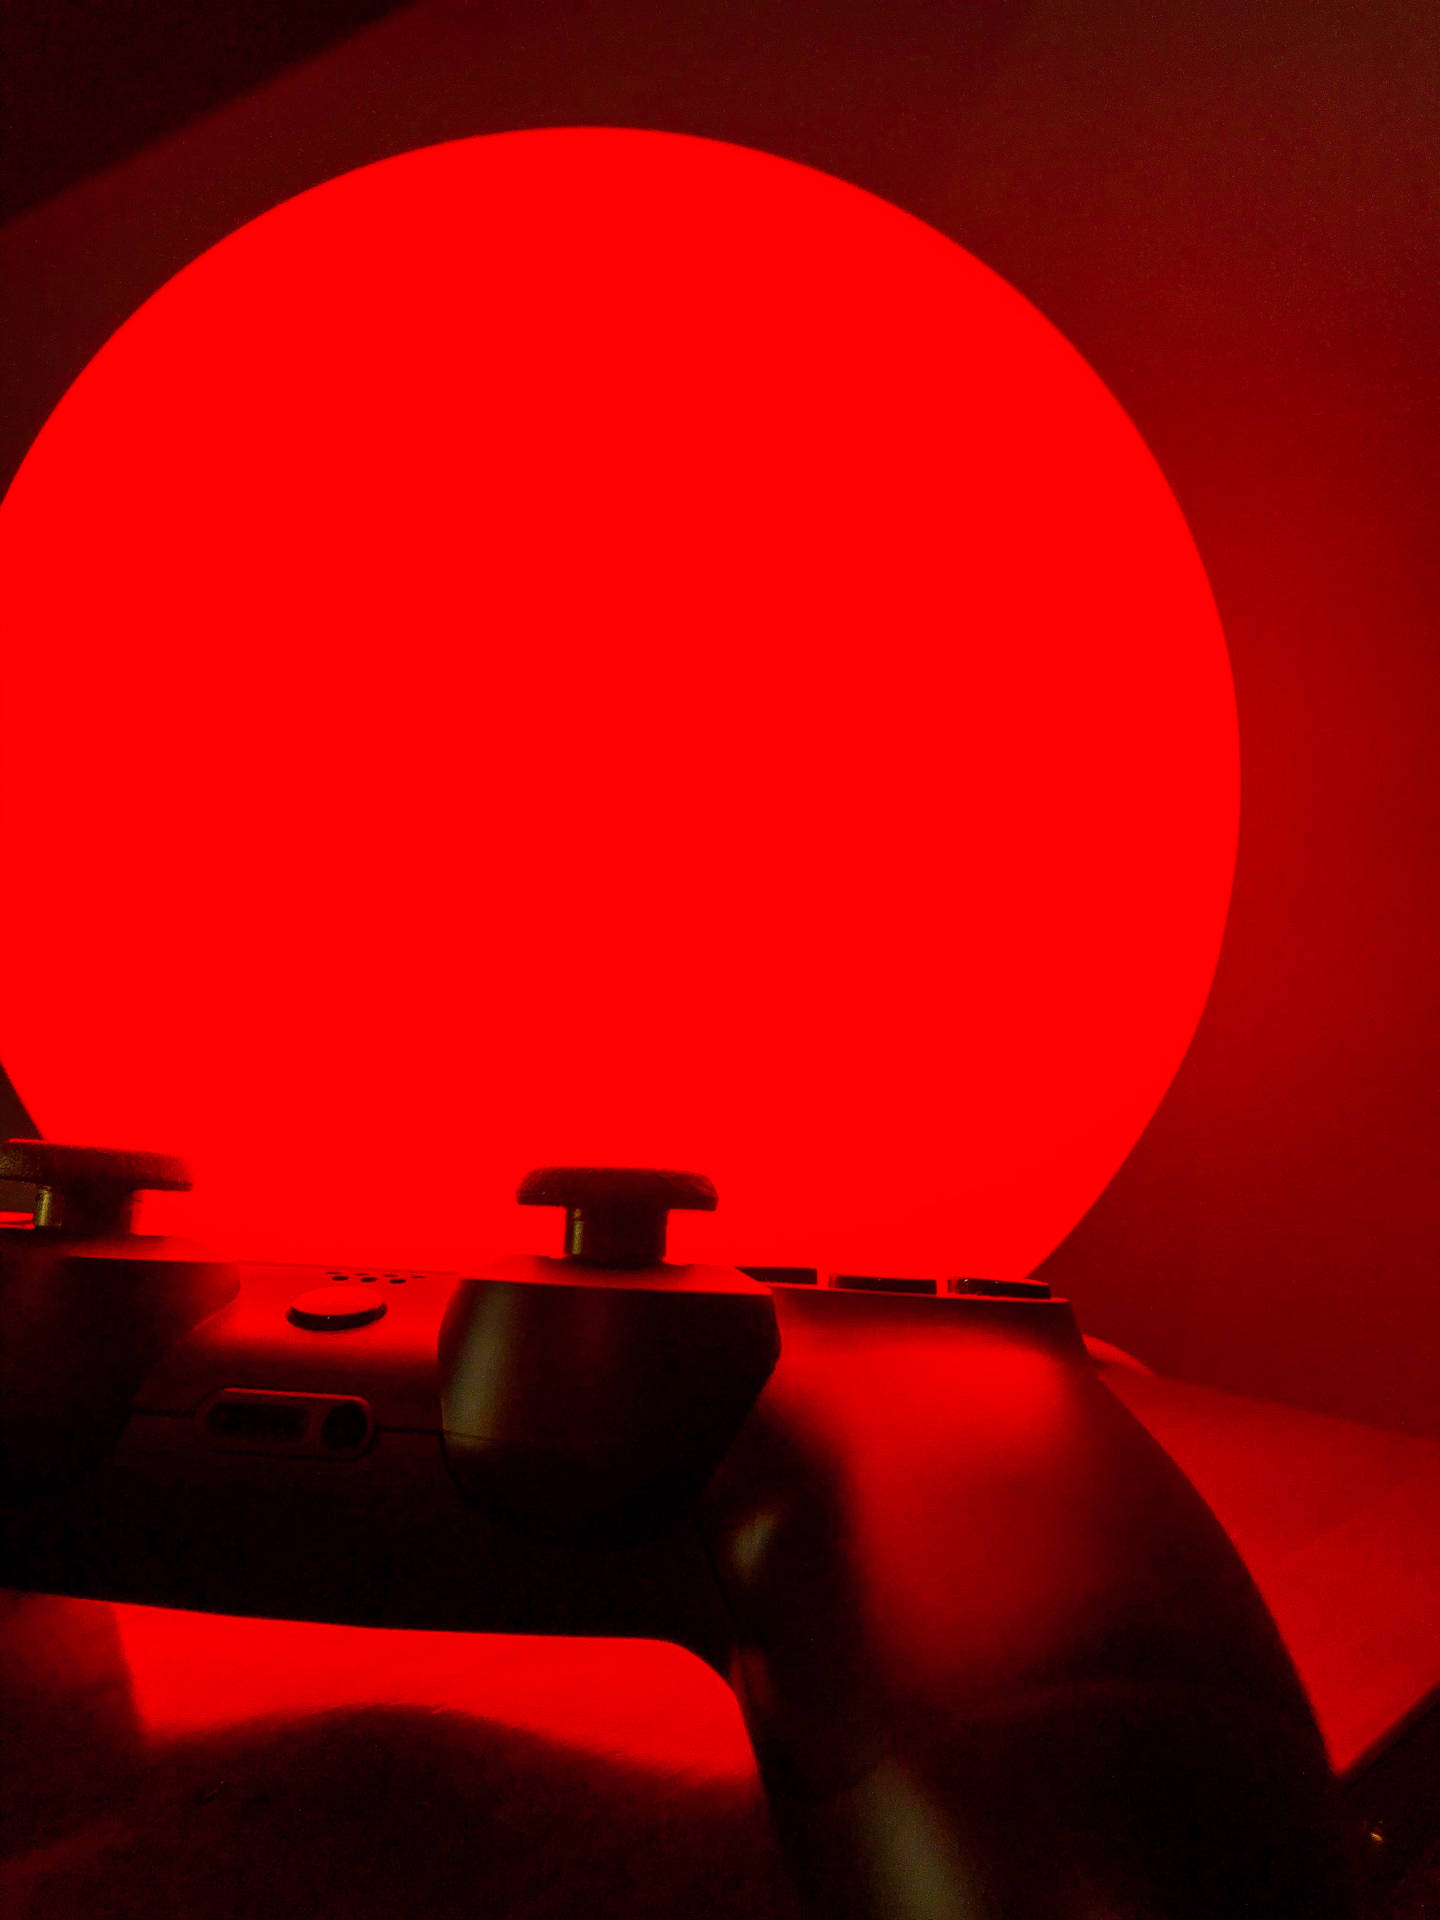 Game On With This Vivid Red Wireless Controller Background